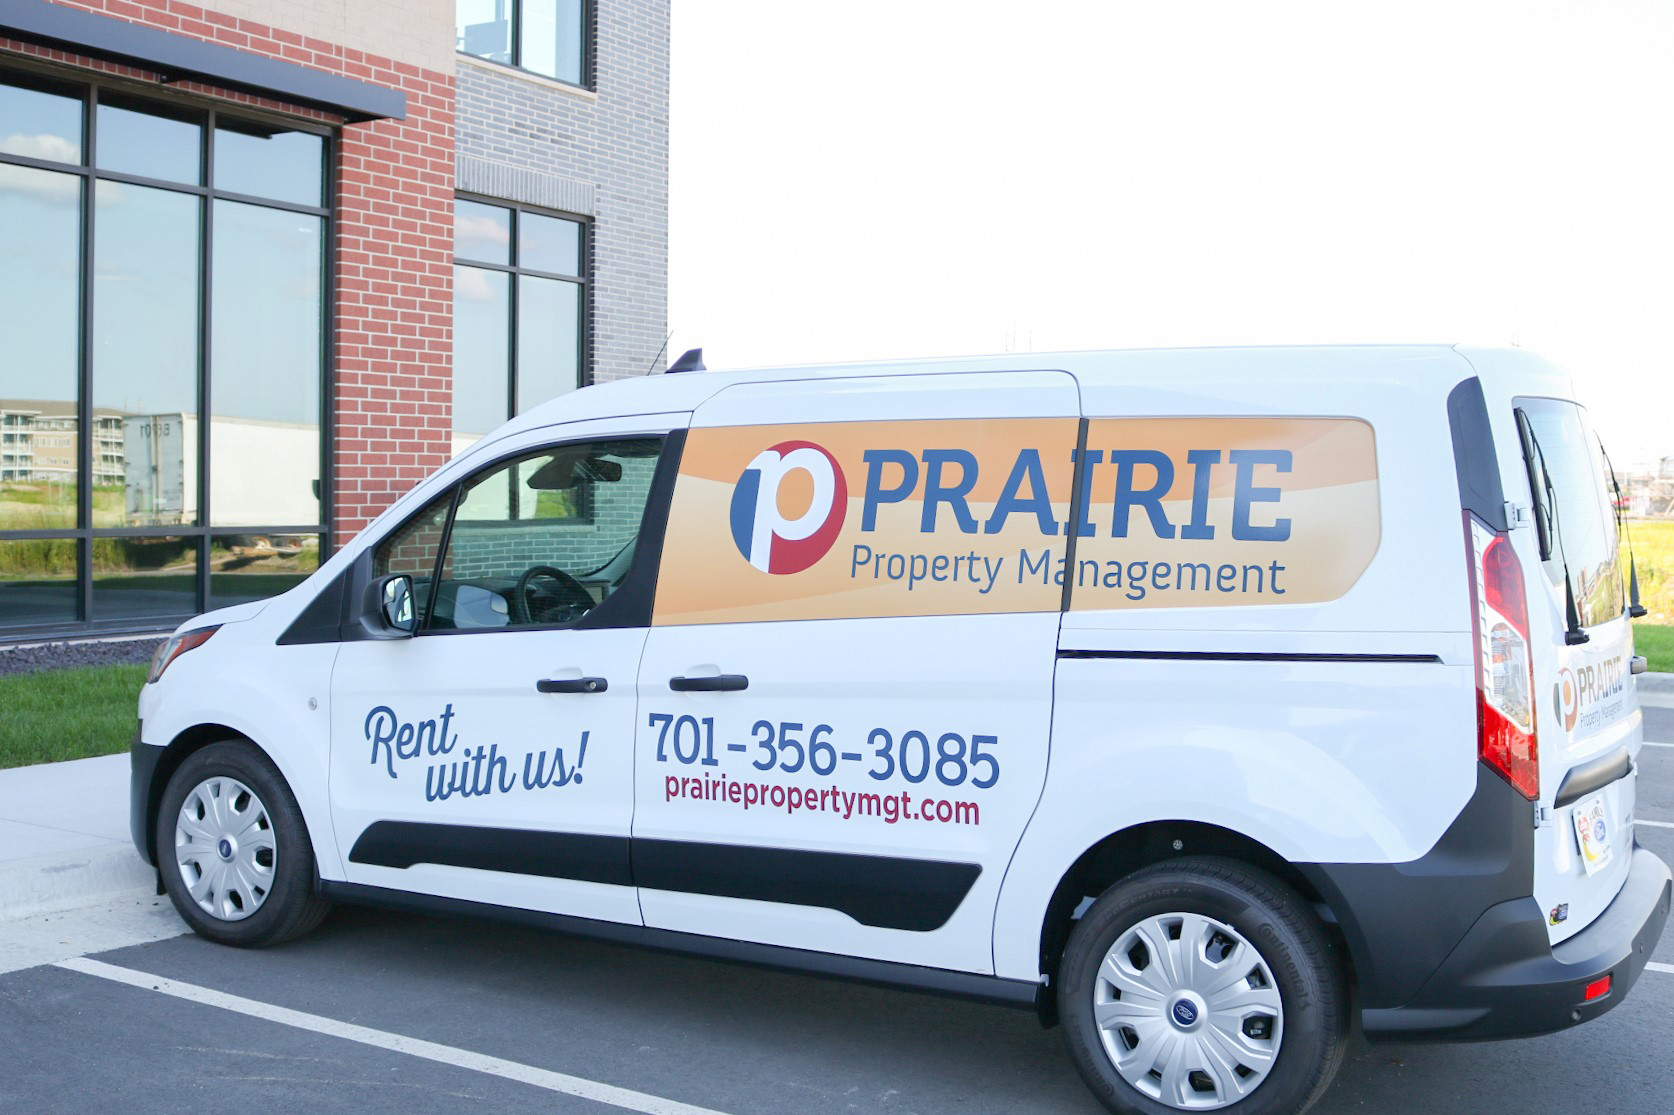 Prairie Property Management adds a Maintenance Division